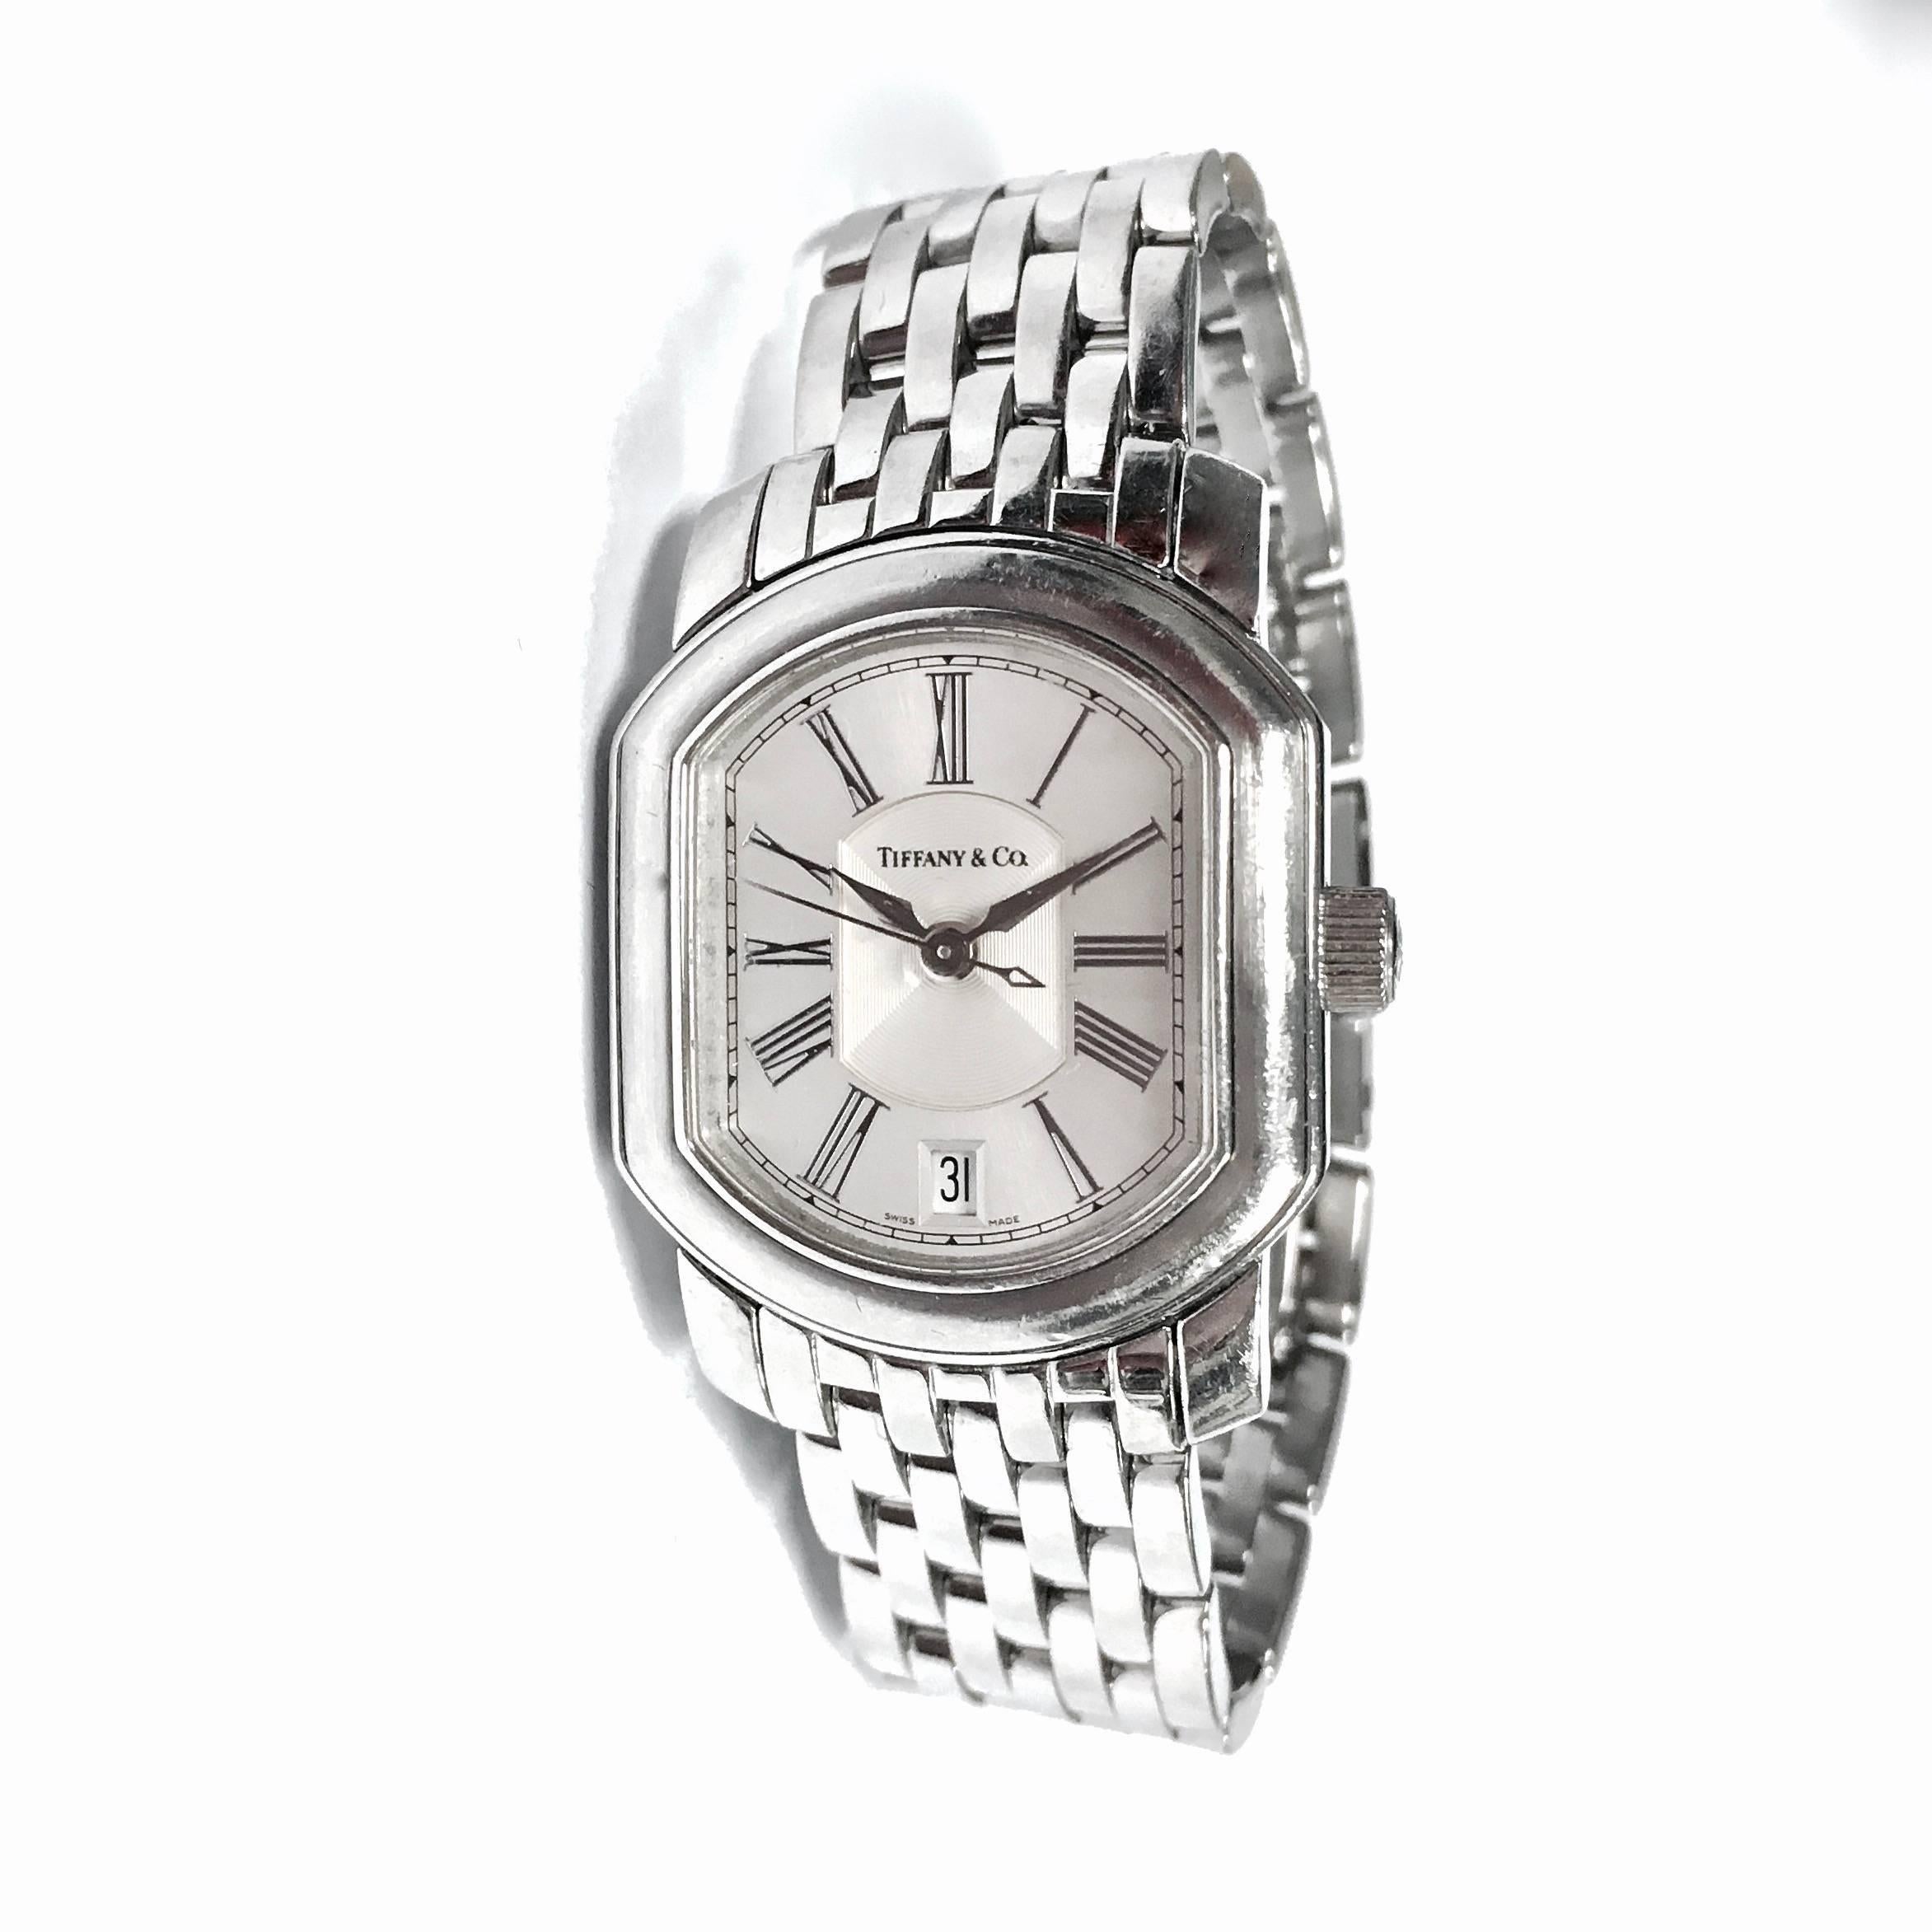 Tiffany and Co. Mark Coupe Resonator stainless steel automatic wristwatch.
Case Measurement: 24 mm x 28 mm
Dial:	Silvered Dial with Silver Roman Numerals
Material:	Stainless Steel
Clasp: Double Locking Foldover Clasp
Crystal: Scratch Resistant